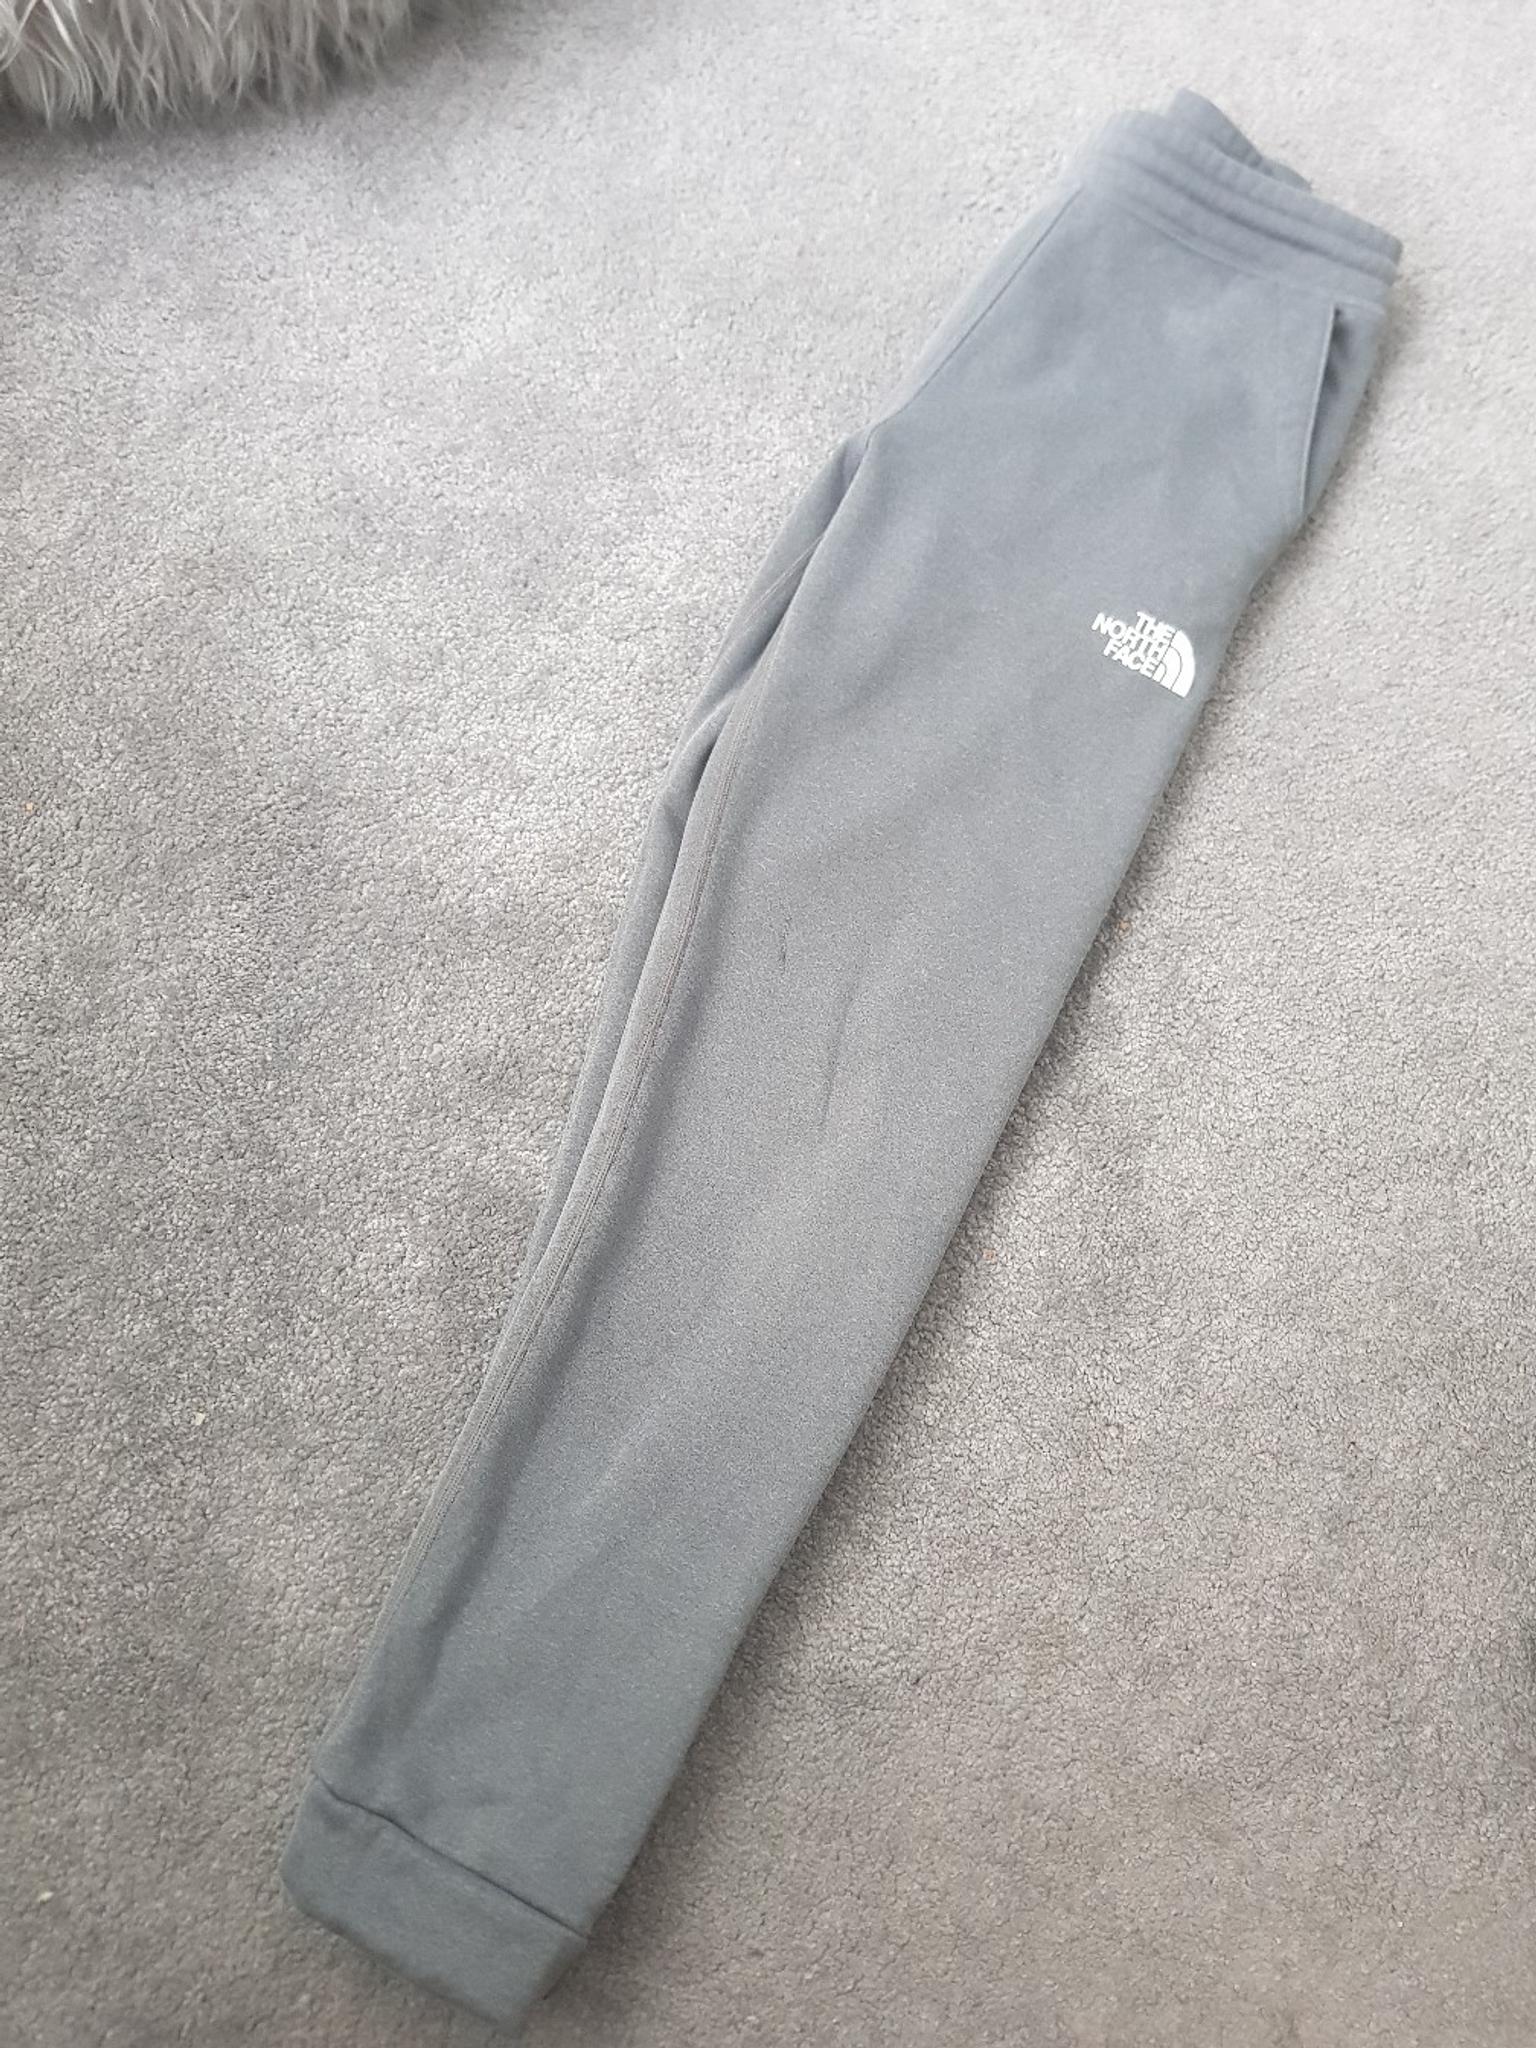 north face tracksuit bottom